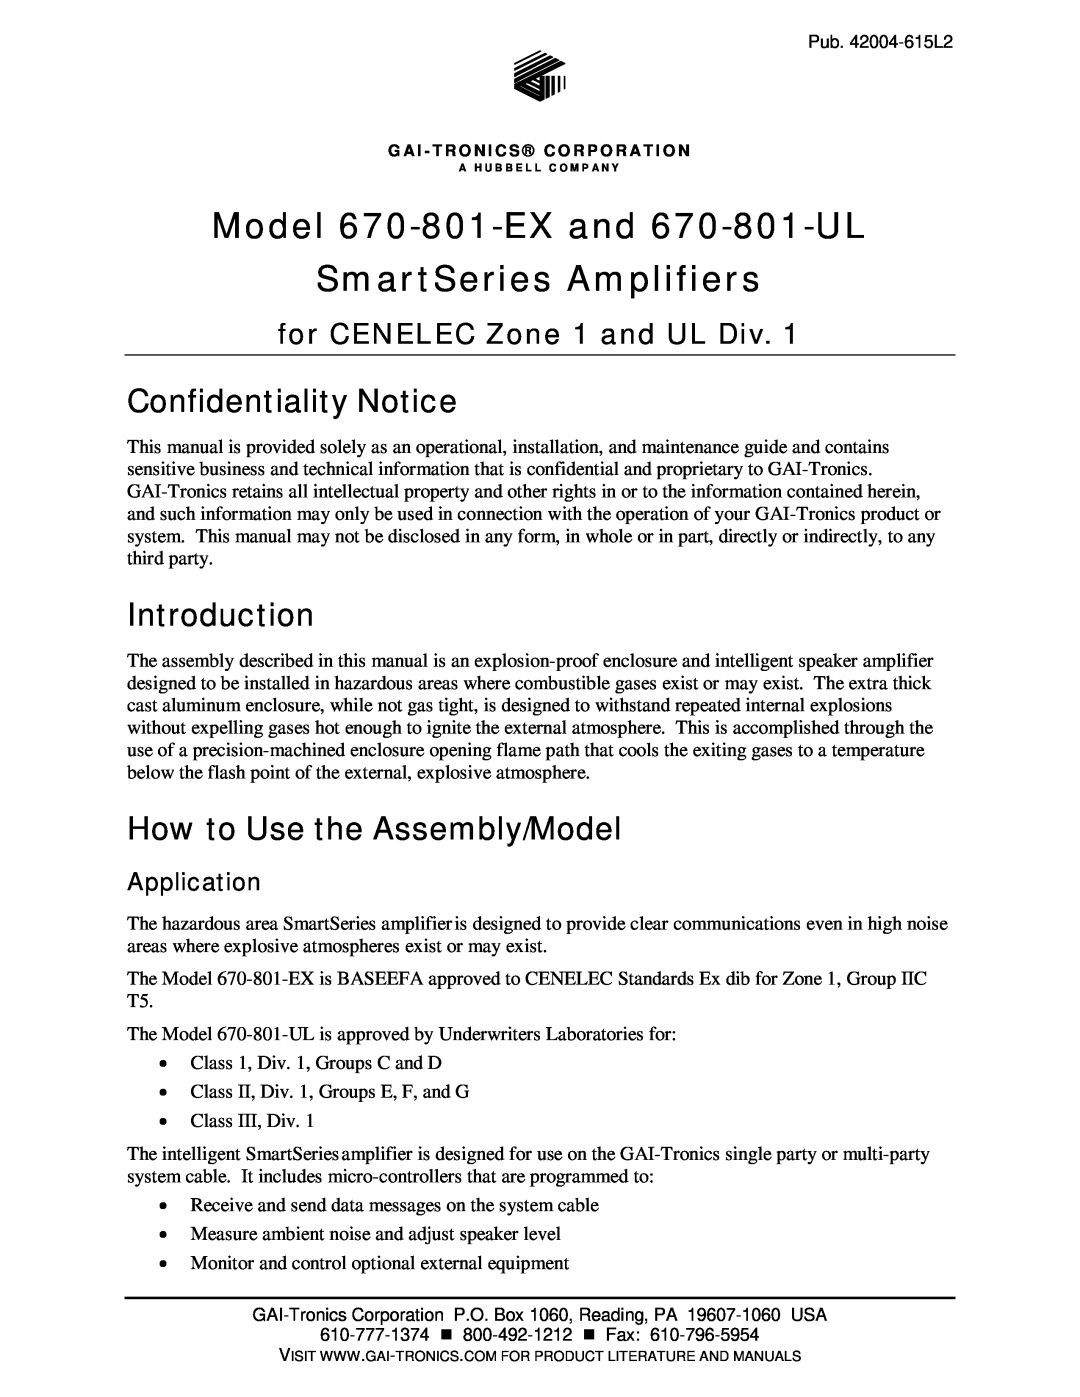 Hubbell 670-801-UL, 670-801-EX manual Confidentiality Notice, Introduction, How to Use the Assembly/Model, Application 